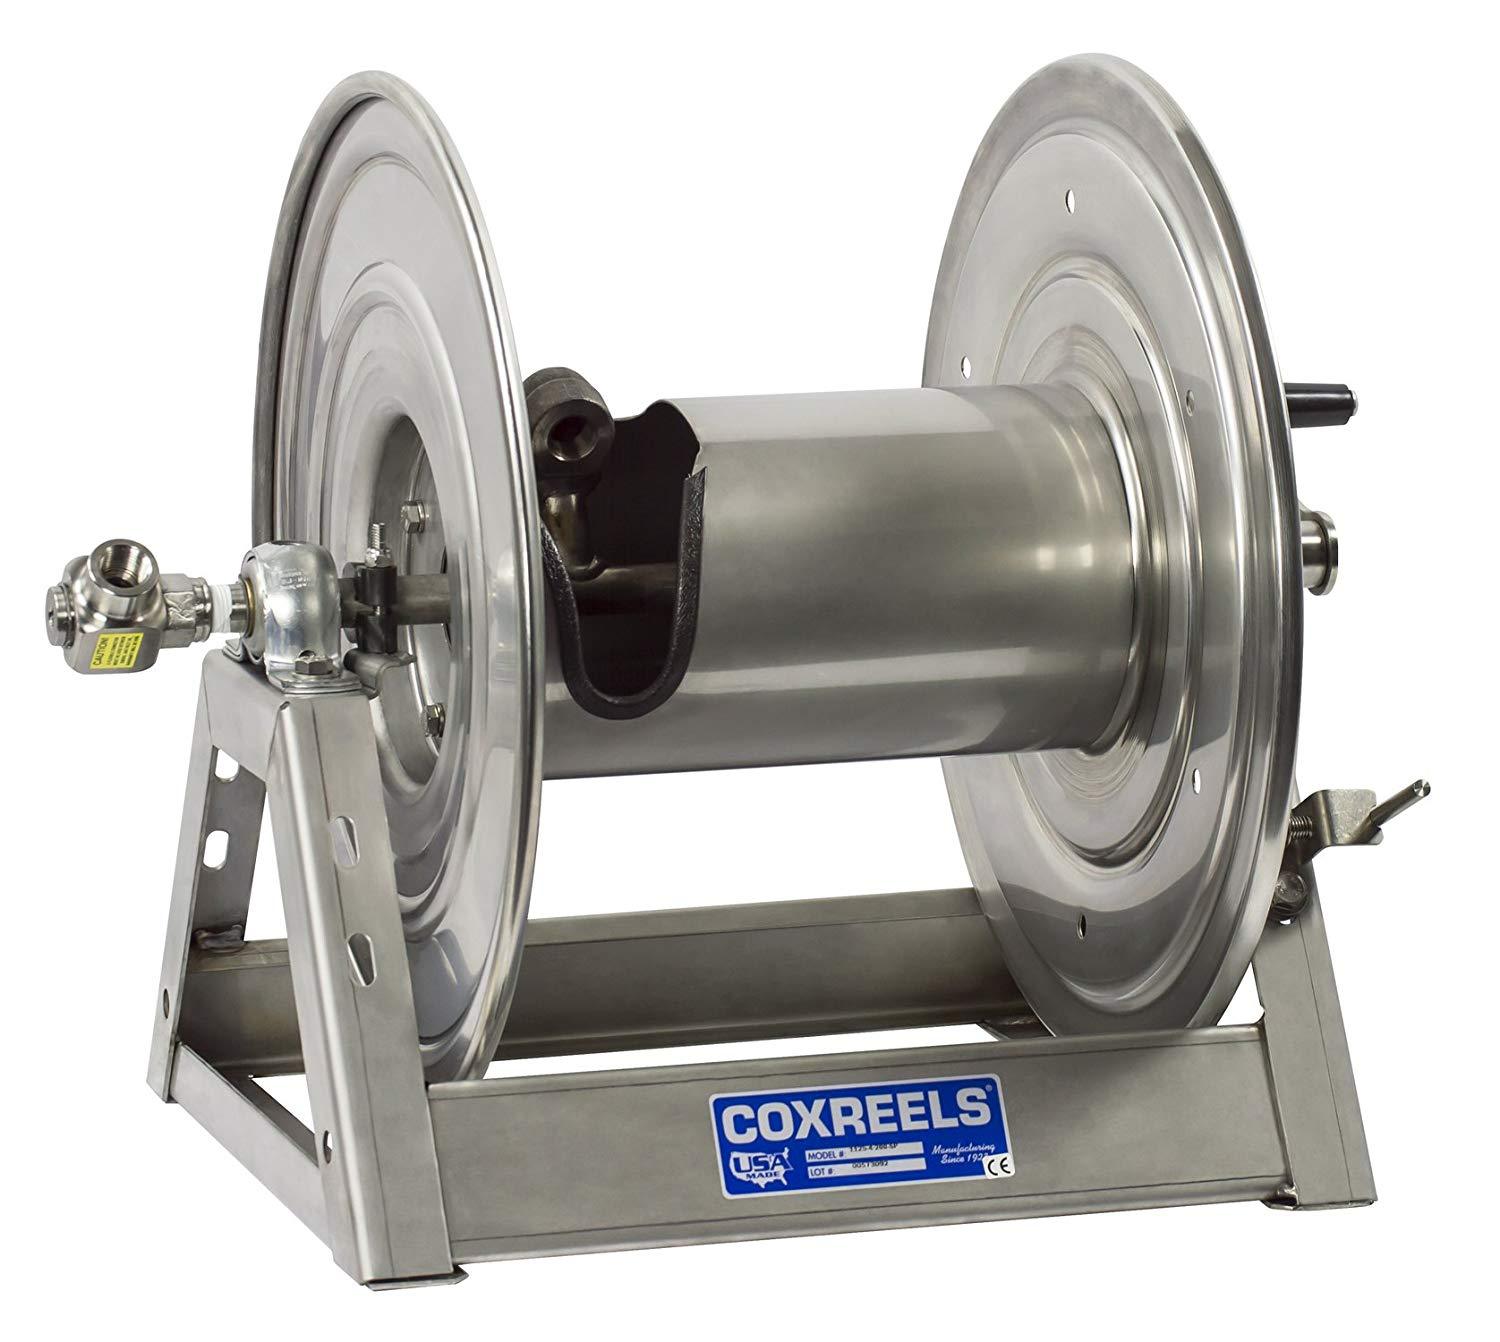 1125-4-100-E-SP : Coxreels 1125-4-100-E-SP Stainless Steel Compressed Air  #4 Gast Motor Rewind Hose Reel, 1/2 ID, 100' capacity, NO HOSE, 3000psi